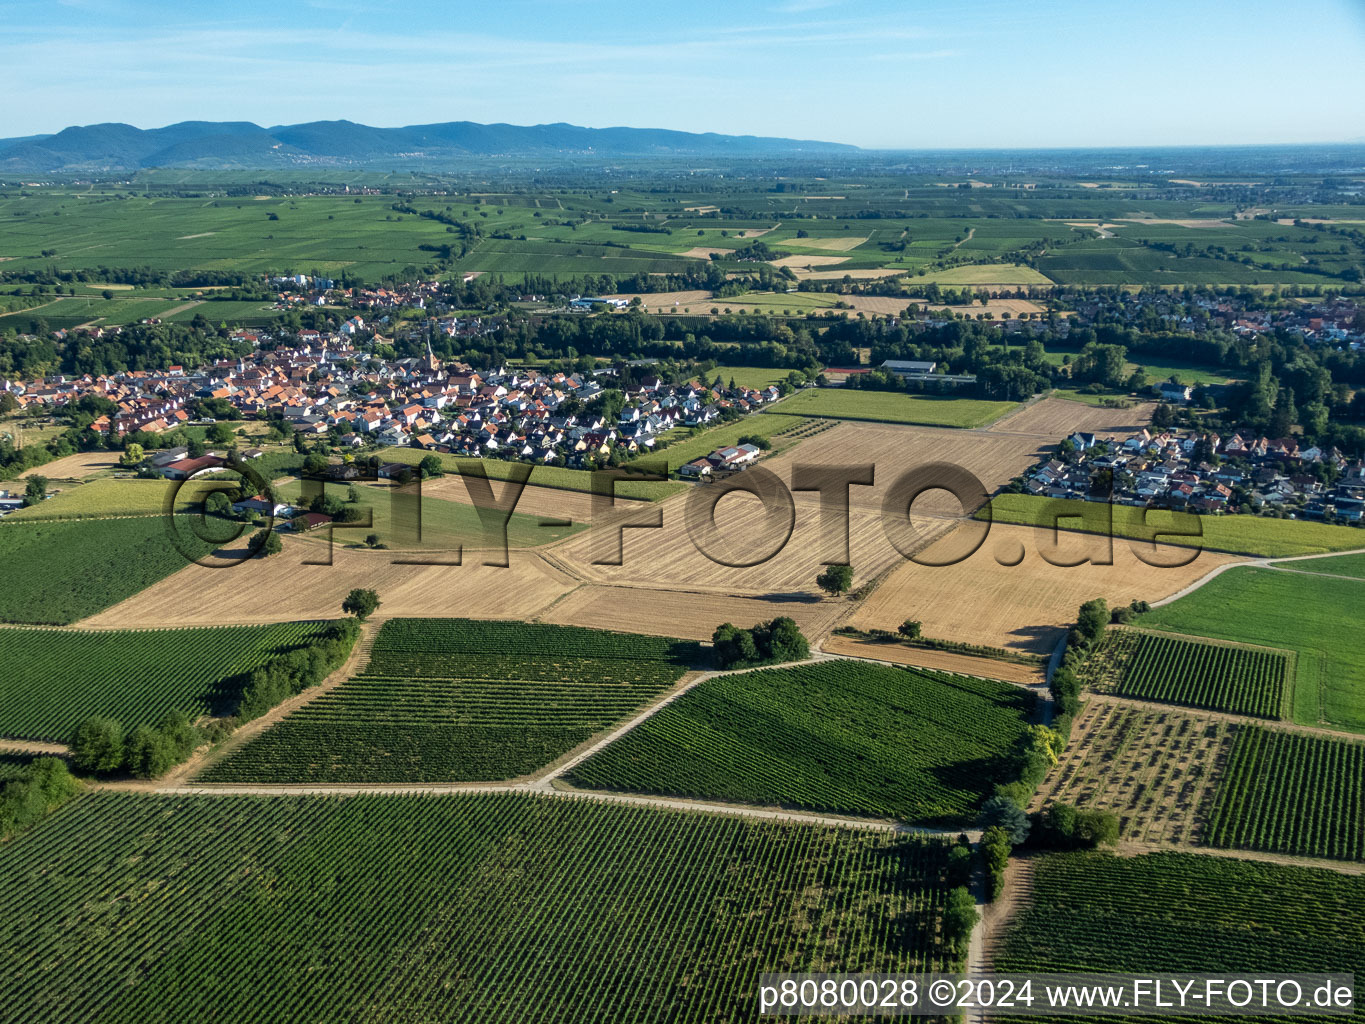 From the south in the district Ingenheim in Billigheim-Ingenheim in the state Rhineland-Palatinate, Germany